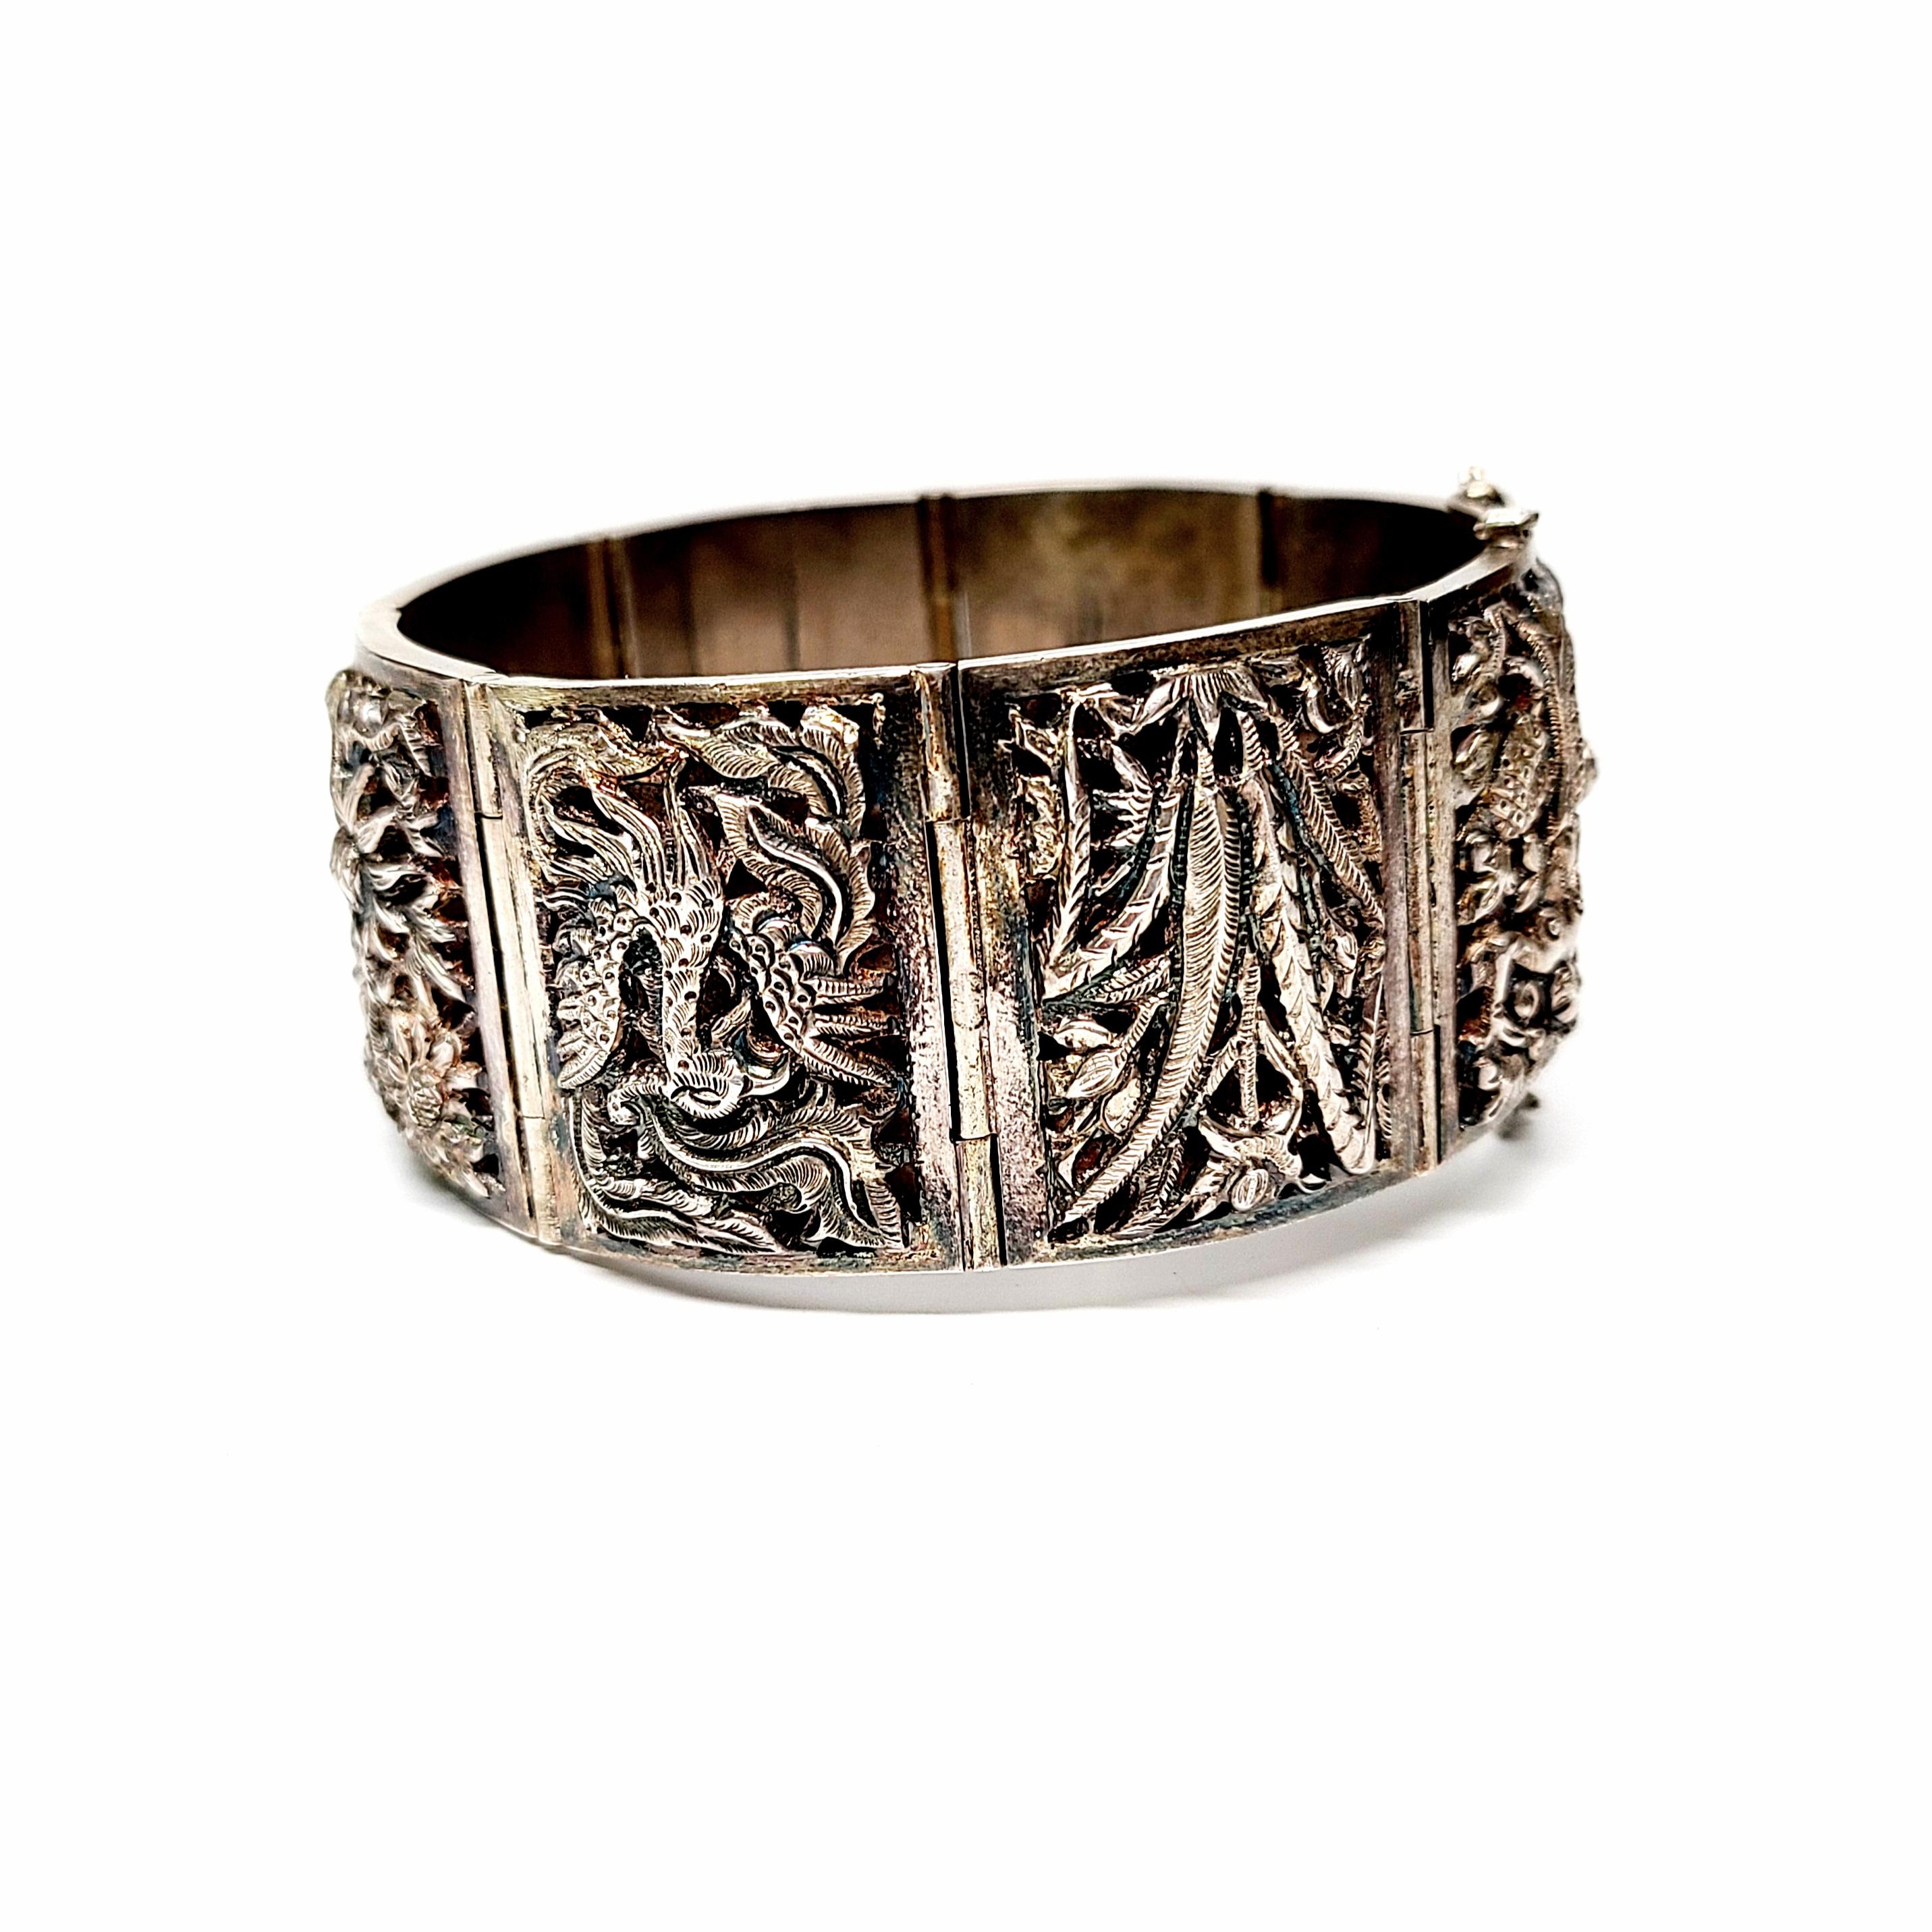 Vintage Chinese Export silver Four Seasons panel bracelet.

Bracelet features eight panel links, raised in a high relief dome-shape over a polished back of the link. In Chinese culture, four flowers represent the four seasons: orchid for spring,